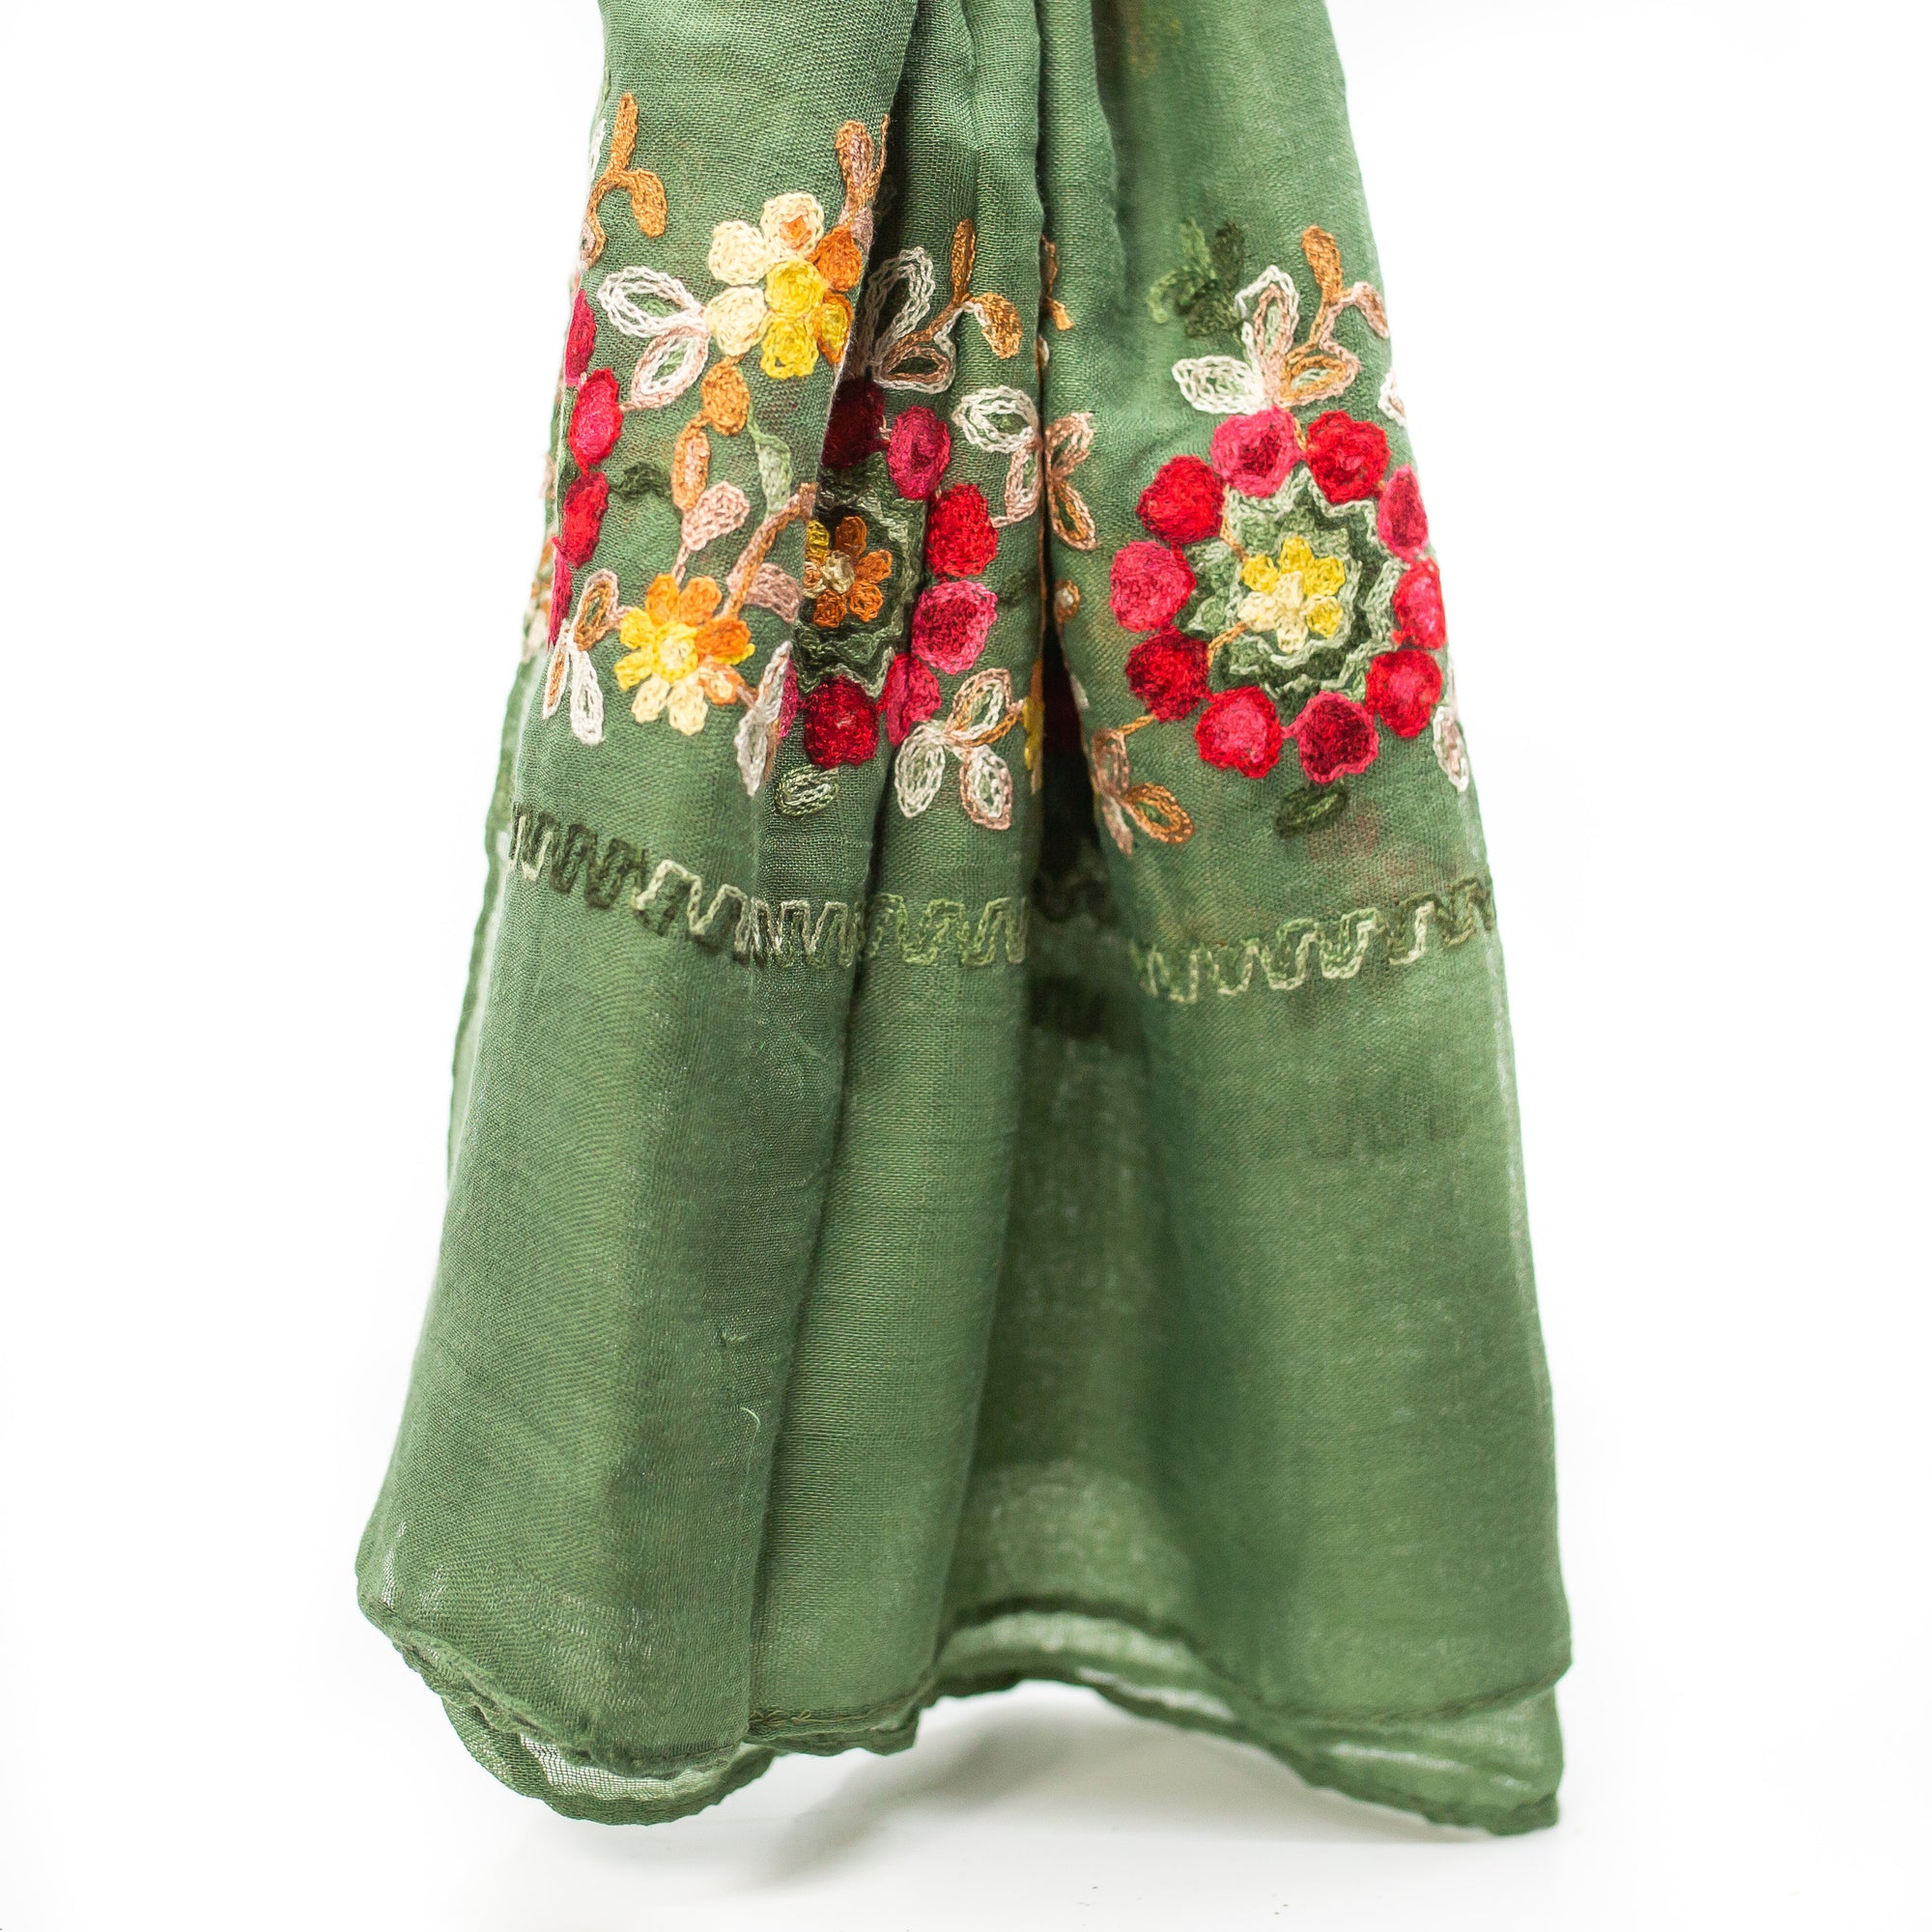 Olive Green Floral Embroidered Cotton Scarf made in Thailand